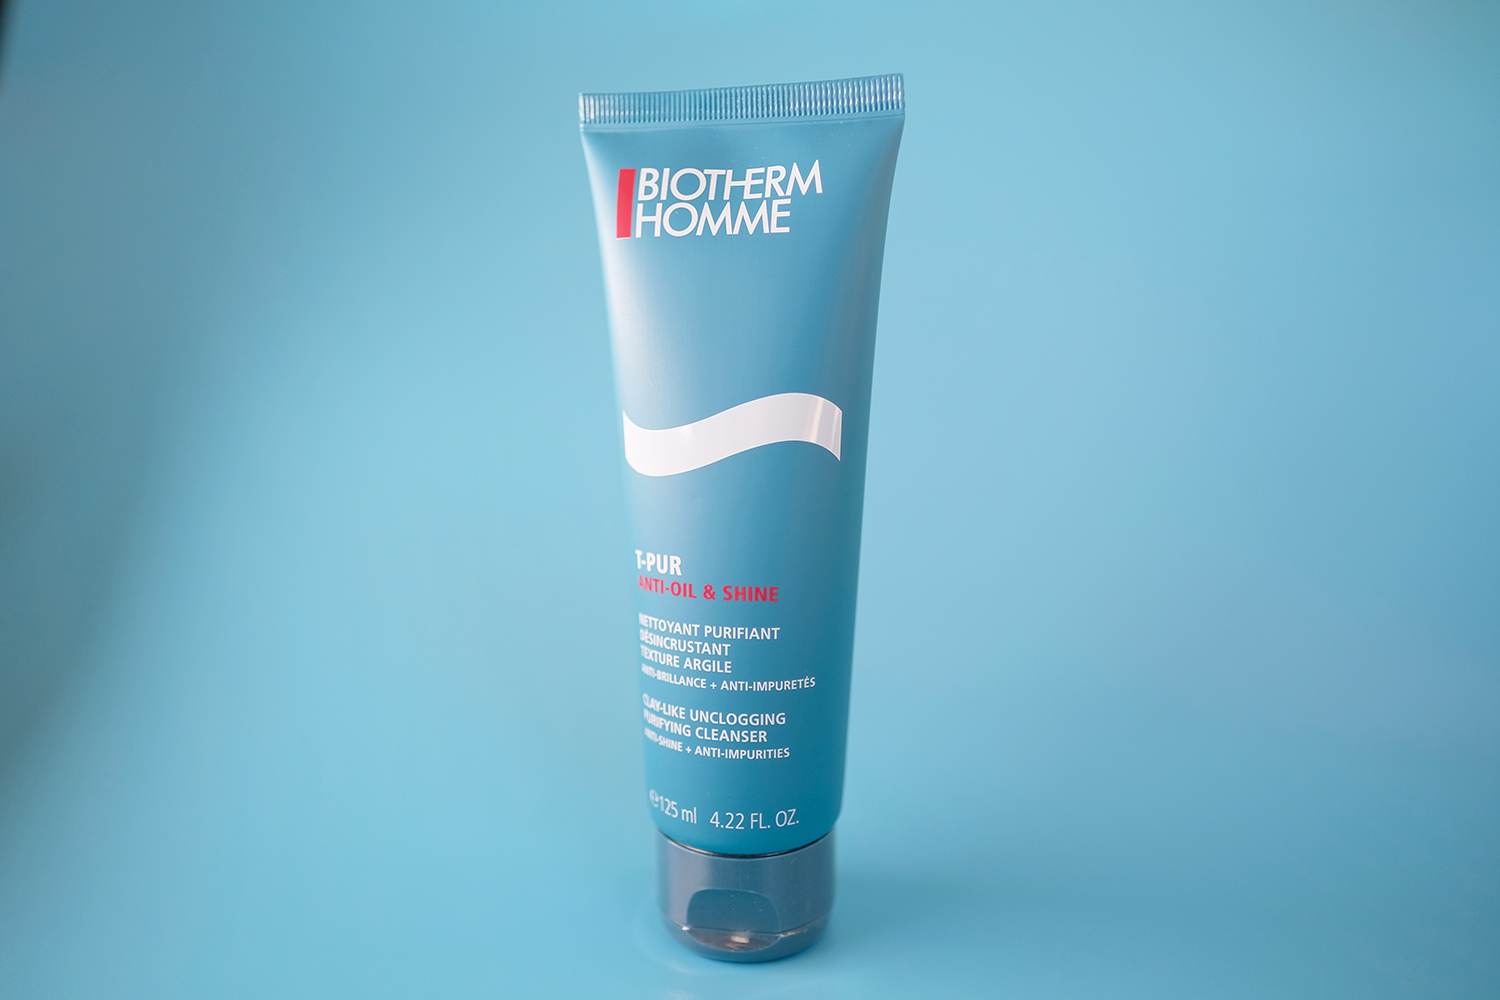 Biotherm Homme T Pur anti-oil & shine review